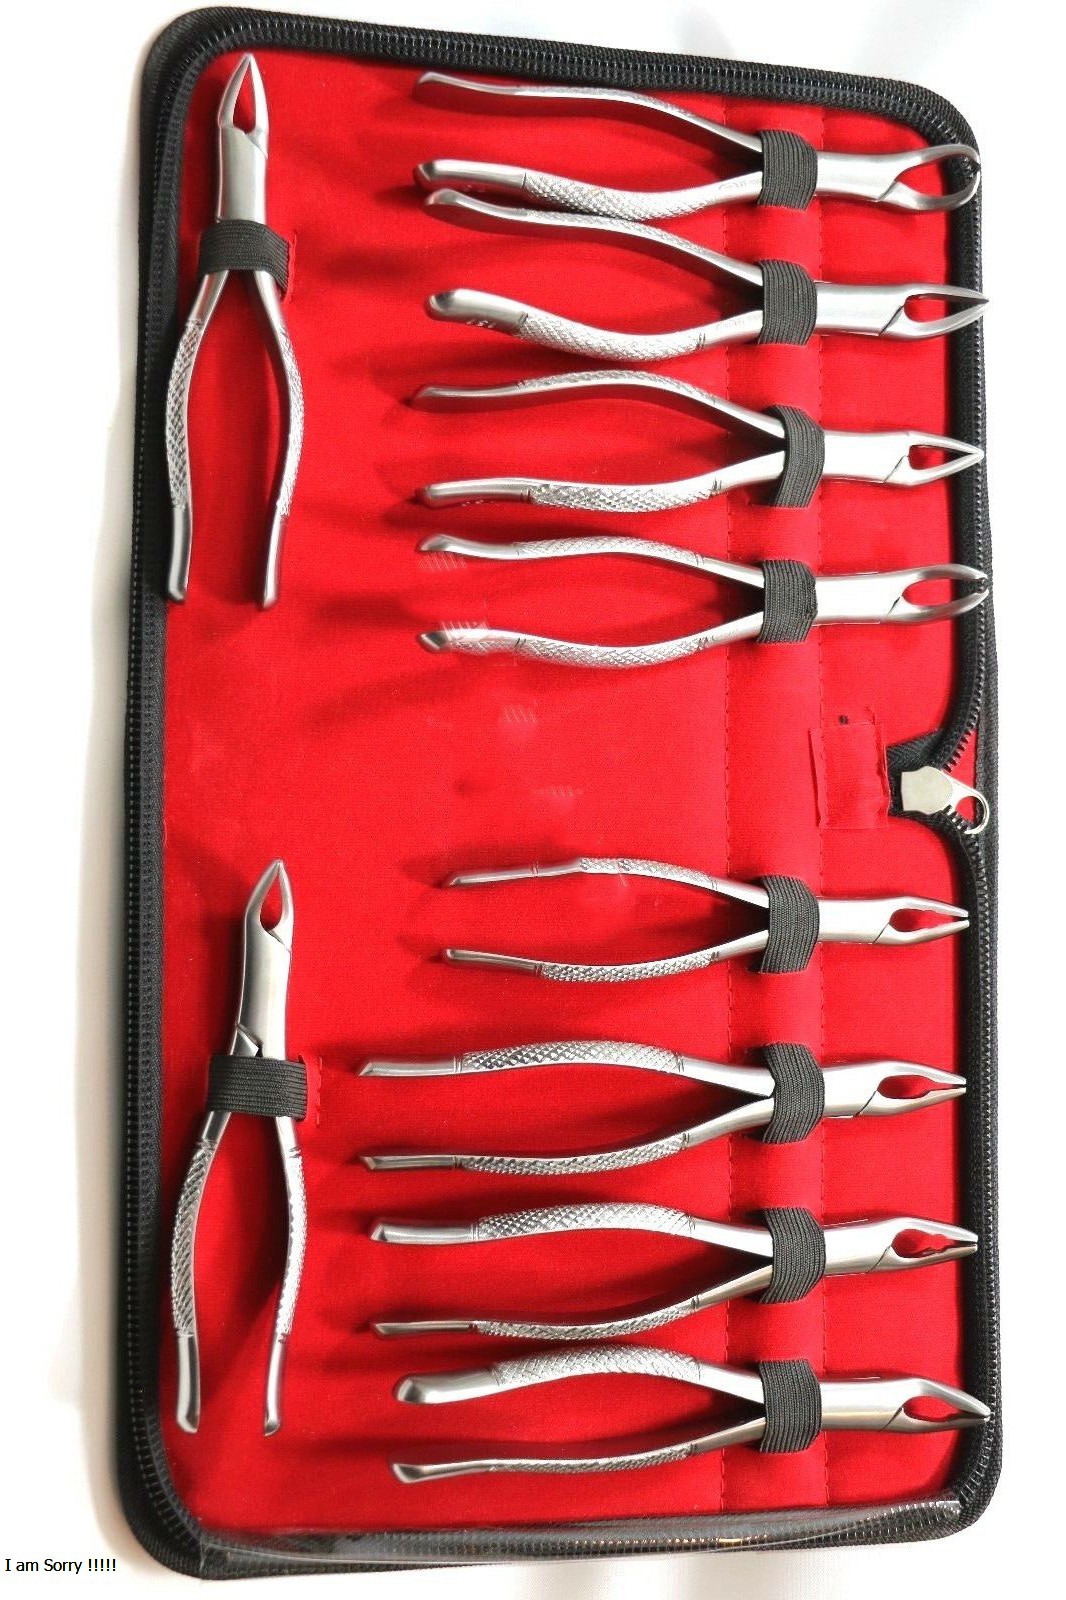 GERMAN-STAINLESS-EXTRACTING-FORCEPS-EXTRACTION-DENTAL-INSTRUMENTS-SET-OF-10-2.jpg